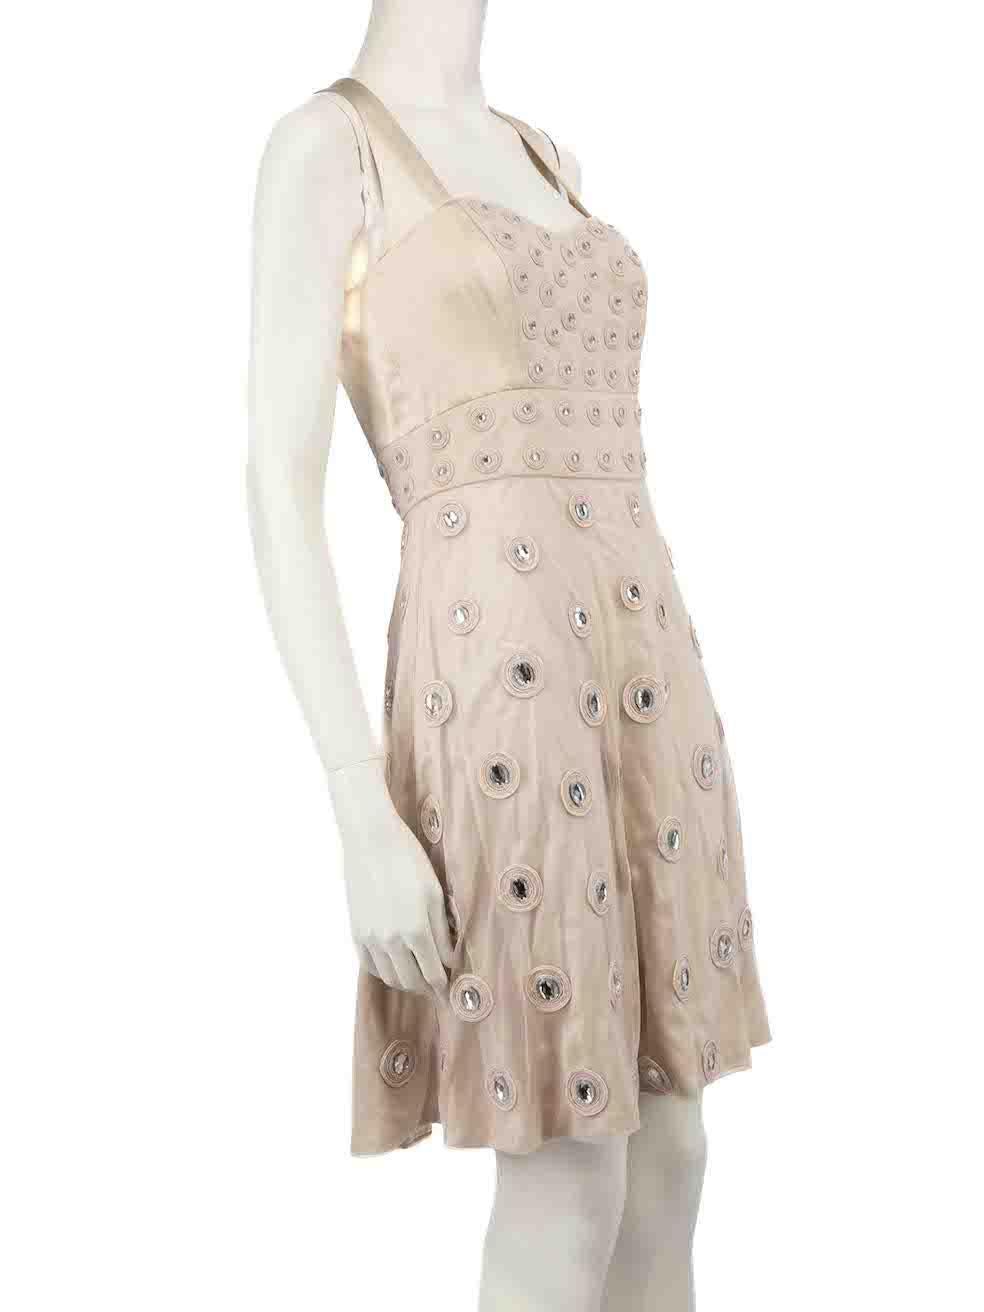 CONDITION is Very good. Hardly any visible wear to dress is evident on this used Temperley London designer resale item.
 
 
 
 Details
 
 
 Beige
 
 Silk
 
 Mini dress
 
 Sweetheart neckline
 
 Crystal embellished
 
 Cross shoulder strap
 
 Side zip